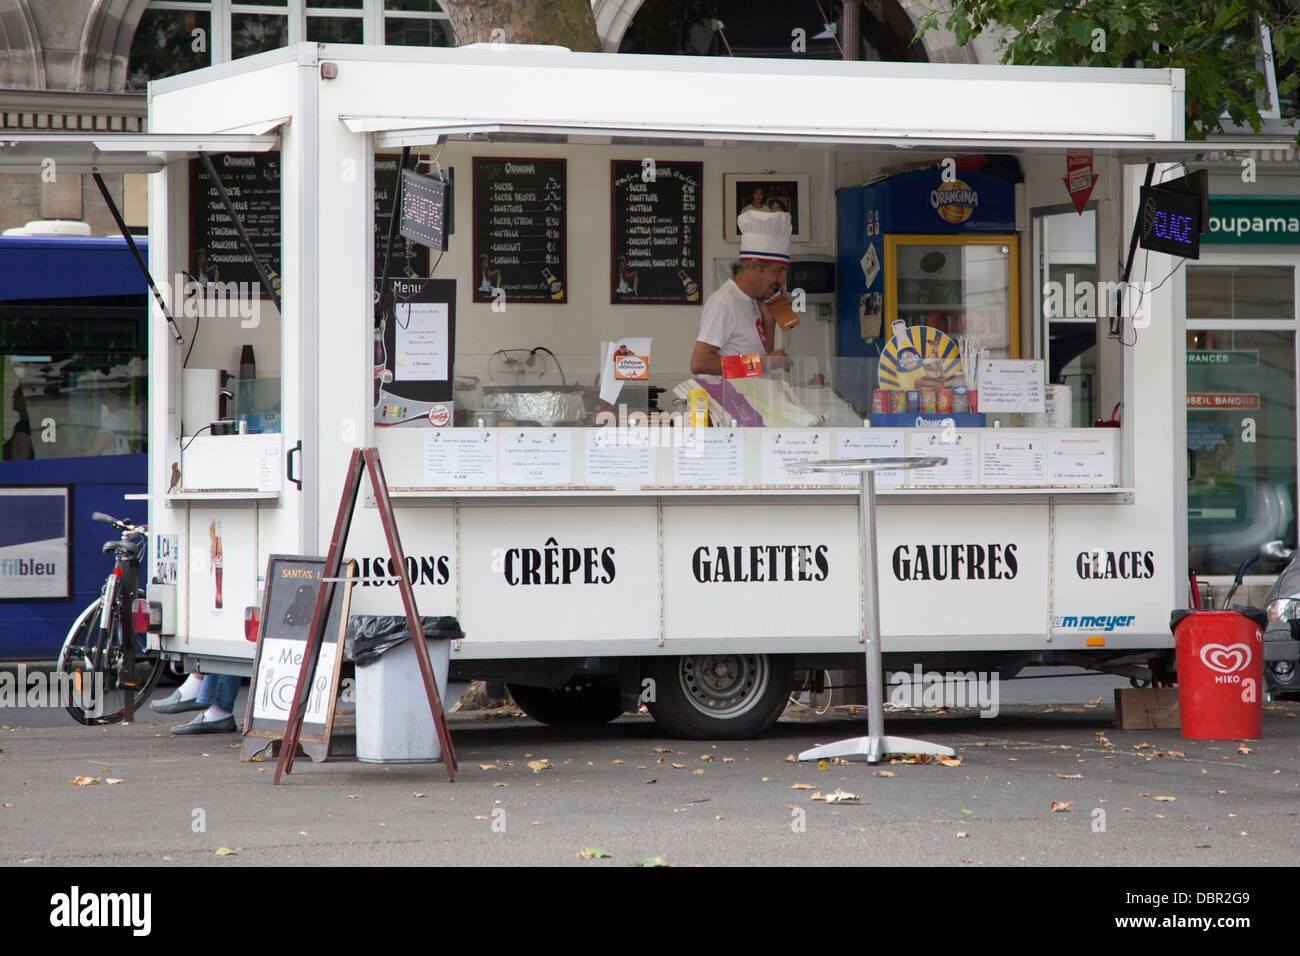 A mobile creperie fast food stall on the street in the city of Tours, France Stock Photo